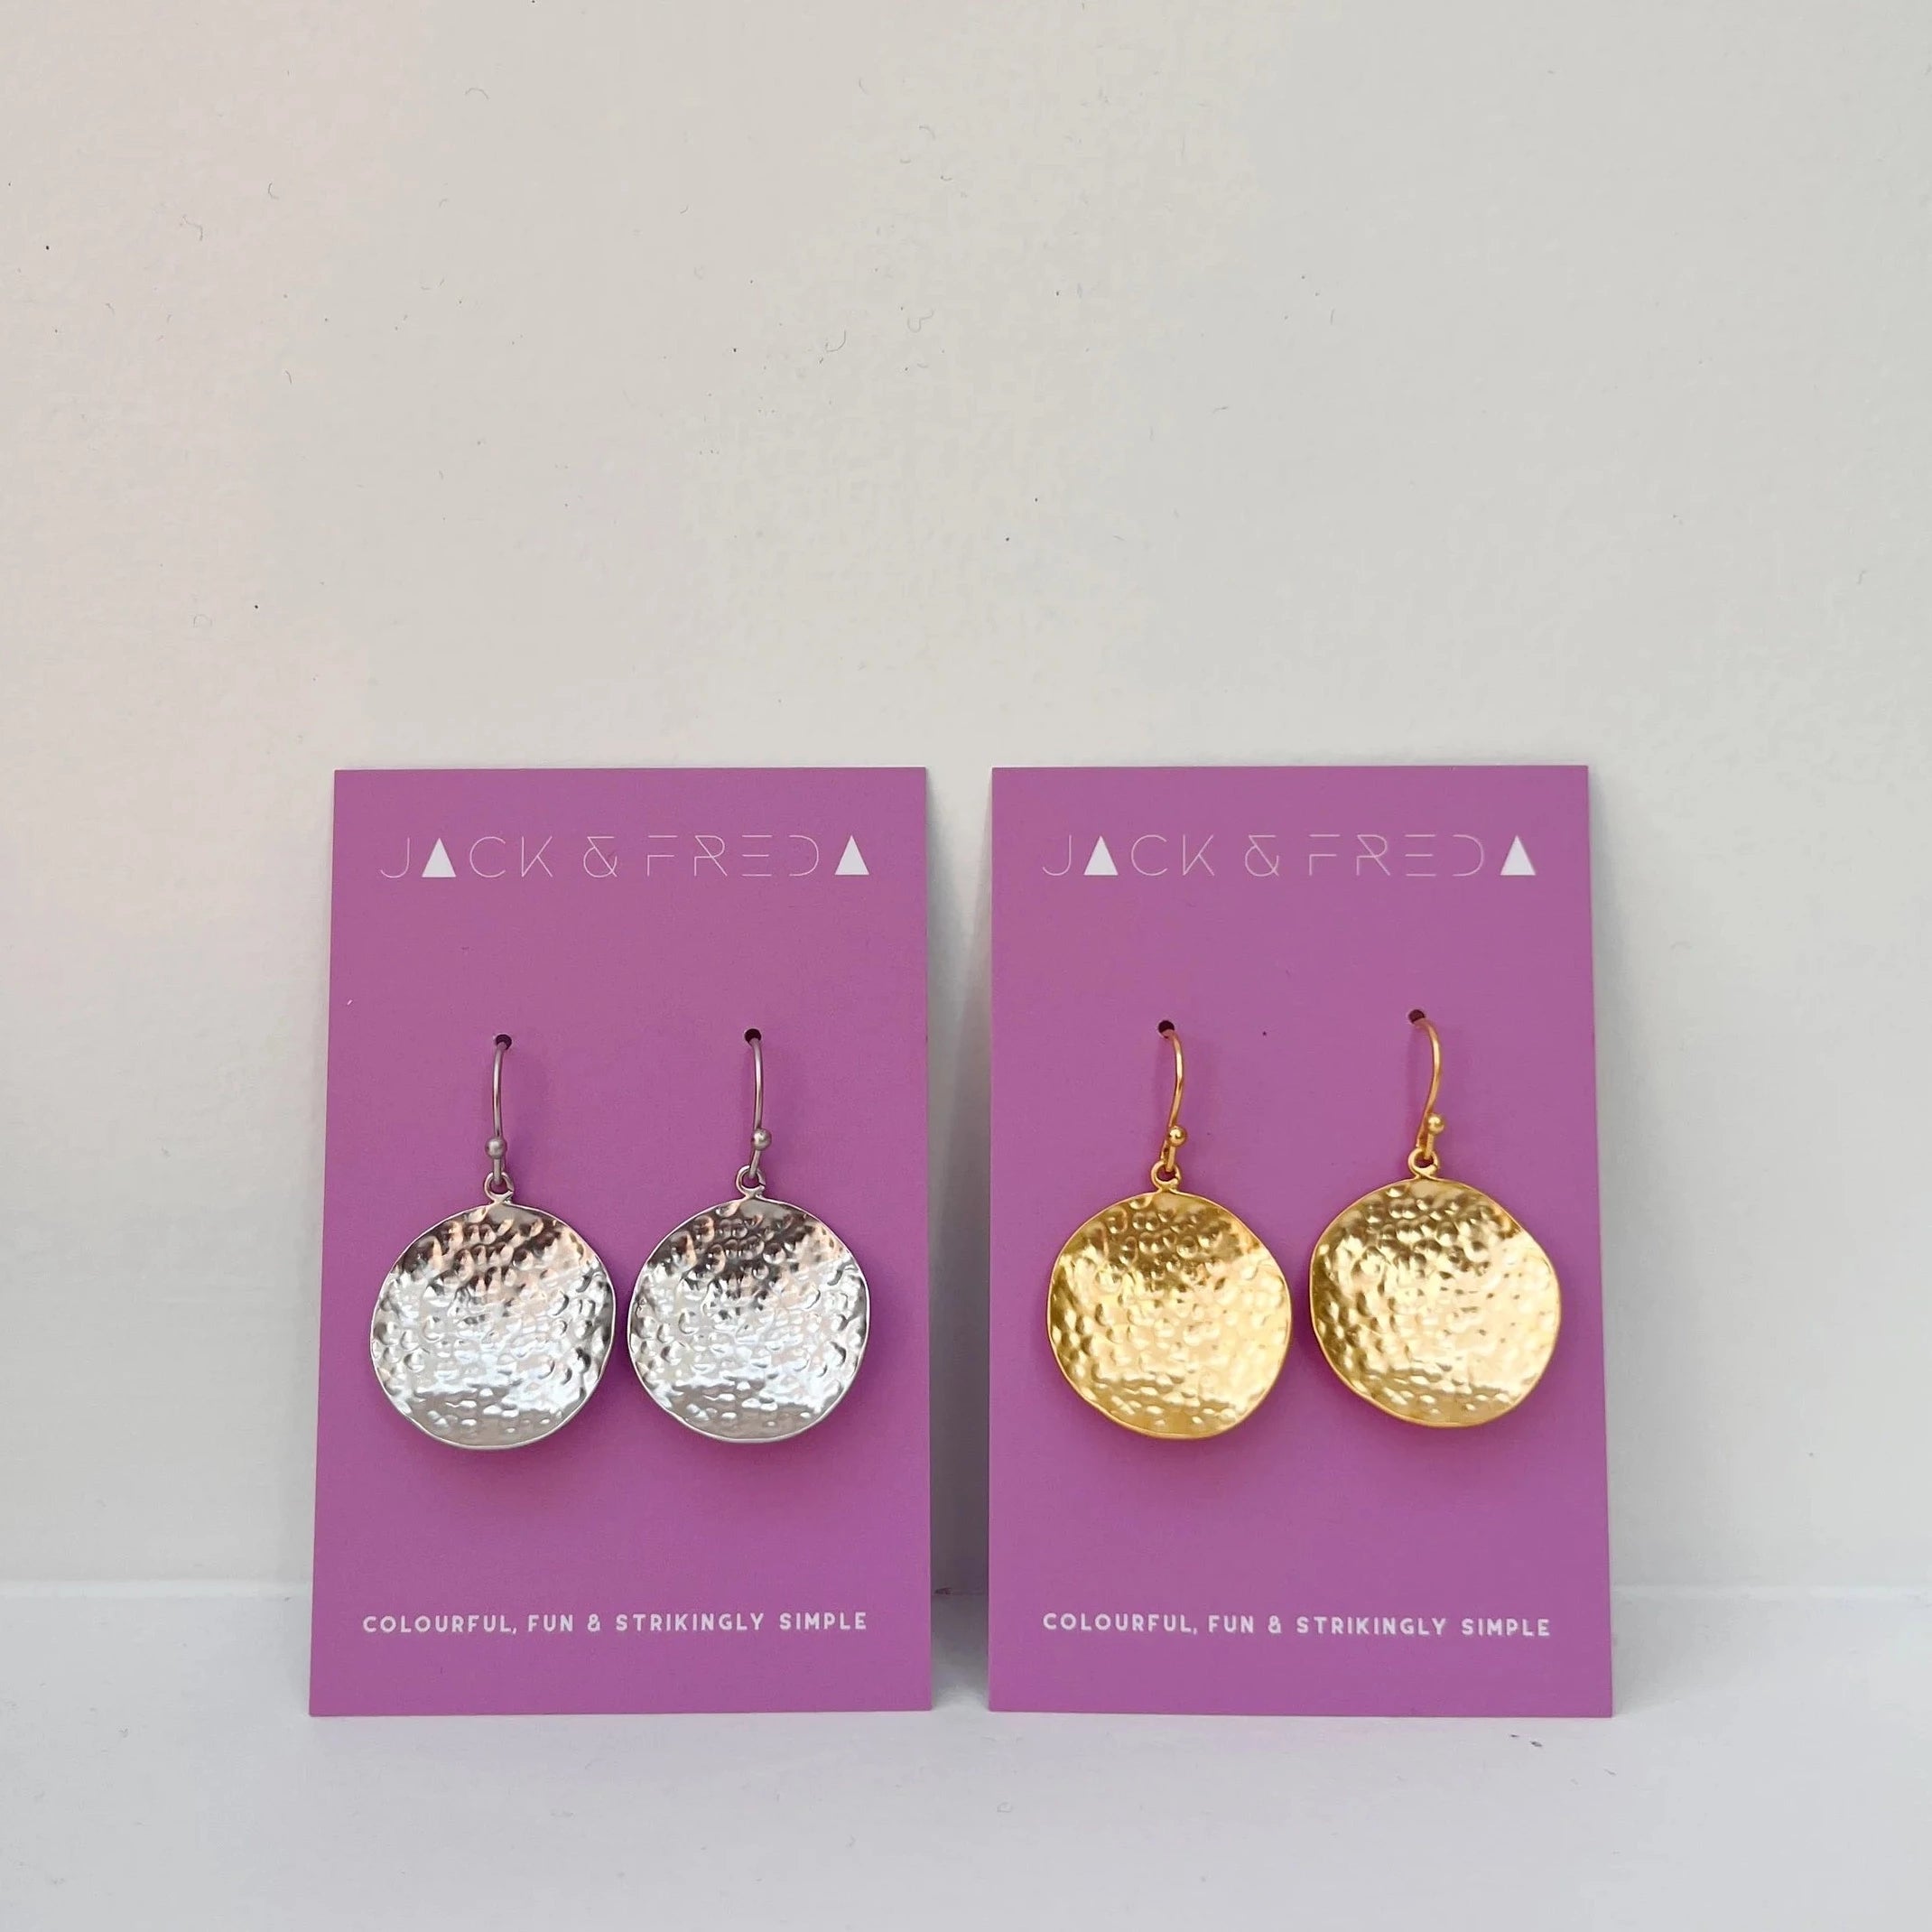 Hammered Coin Earrings - gold / silver